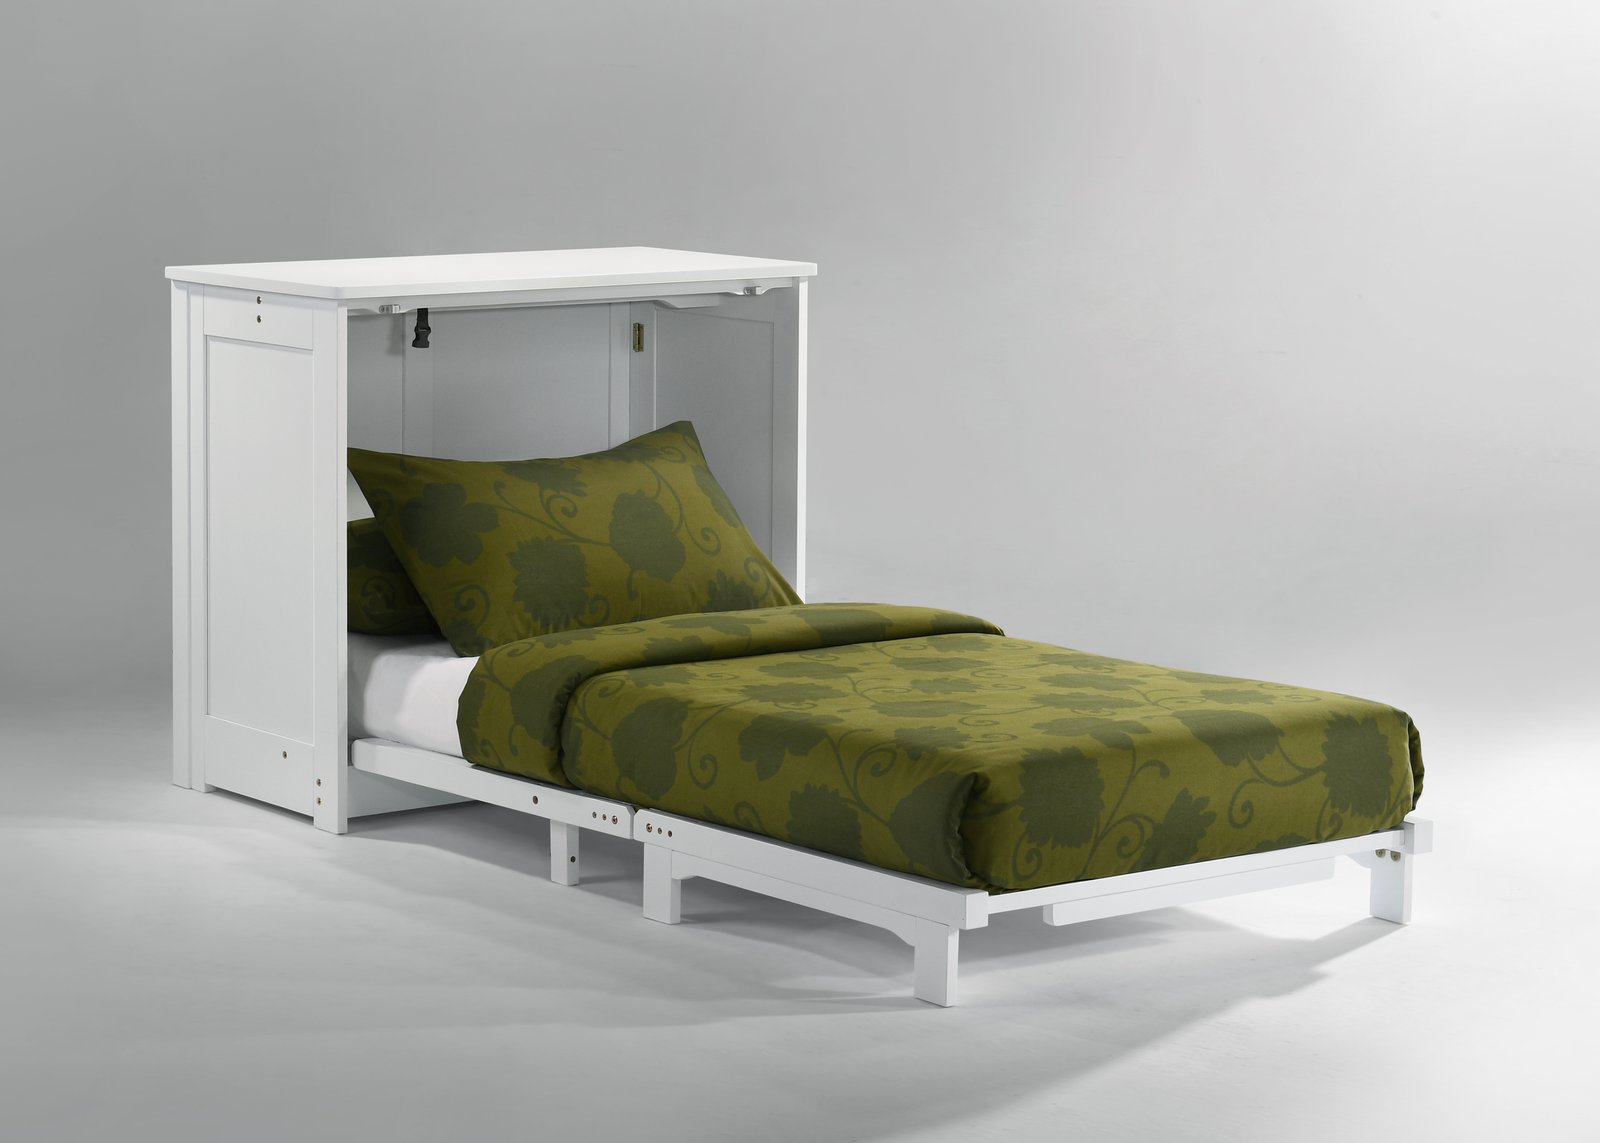 NEW!!! Orion Murphy Cabinet Bed - Twin or Double